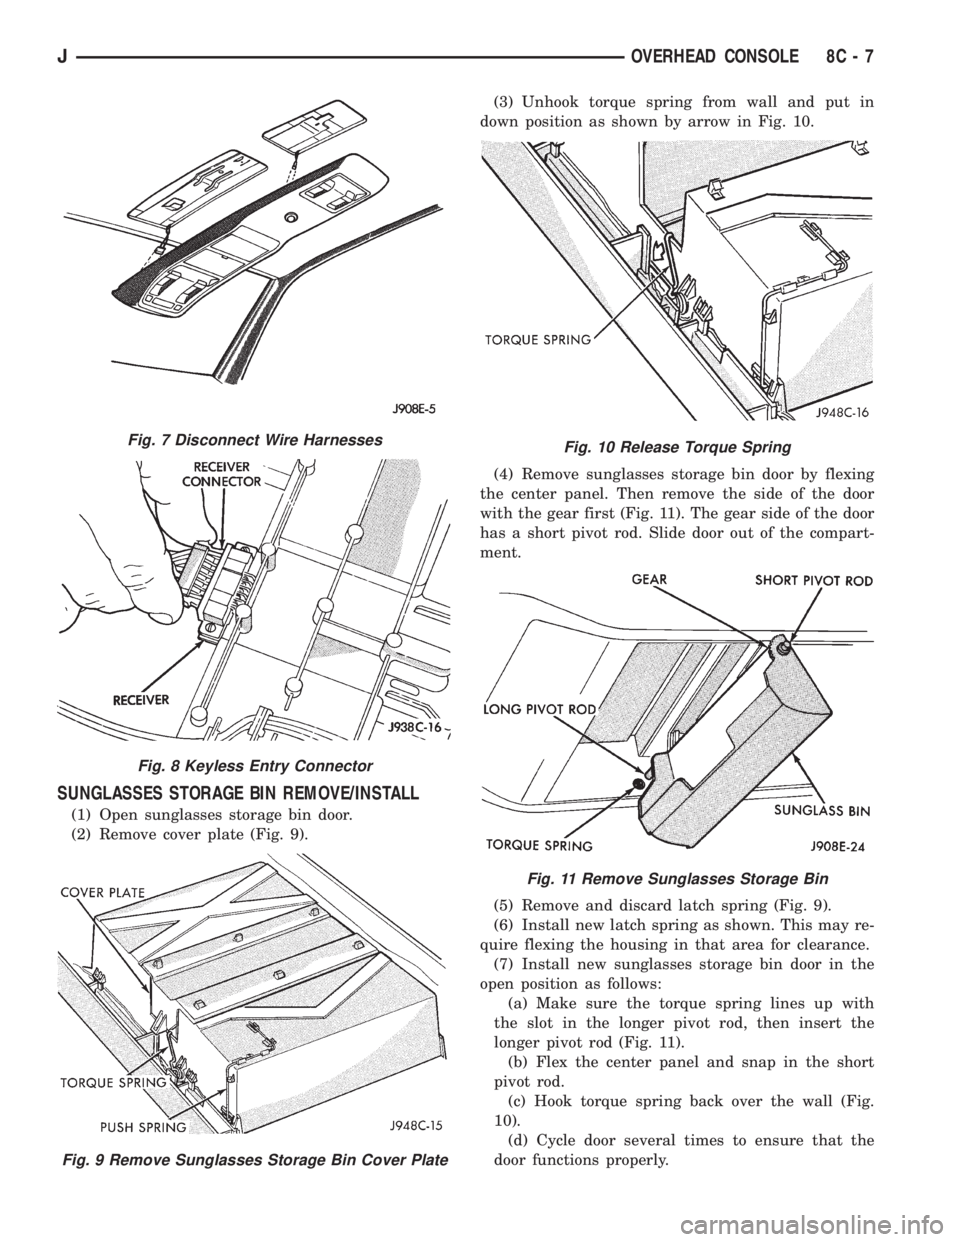 JEEP CHEROKEE 1995  Service Repair Manual SUNGLASSES STORAGE BIN REMOVE/INSTALL
(1) Open sunglasses storage bin door.
(2) Remove cover plate (Fig. 9).(3) Unhook torque spring from wall and put in
down position as shown by arrow in Fig. 10.
(4